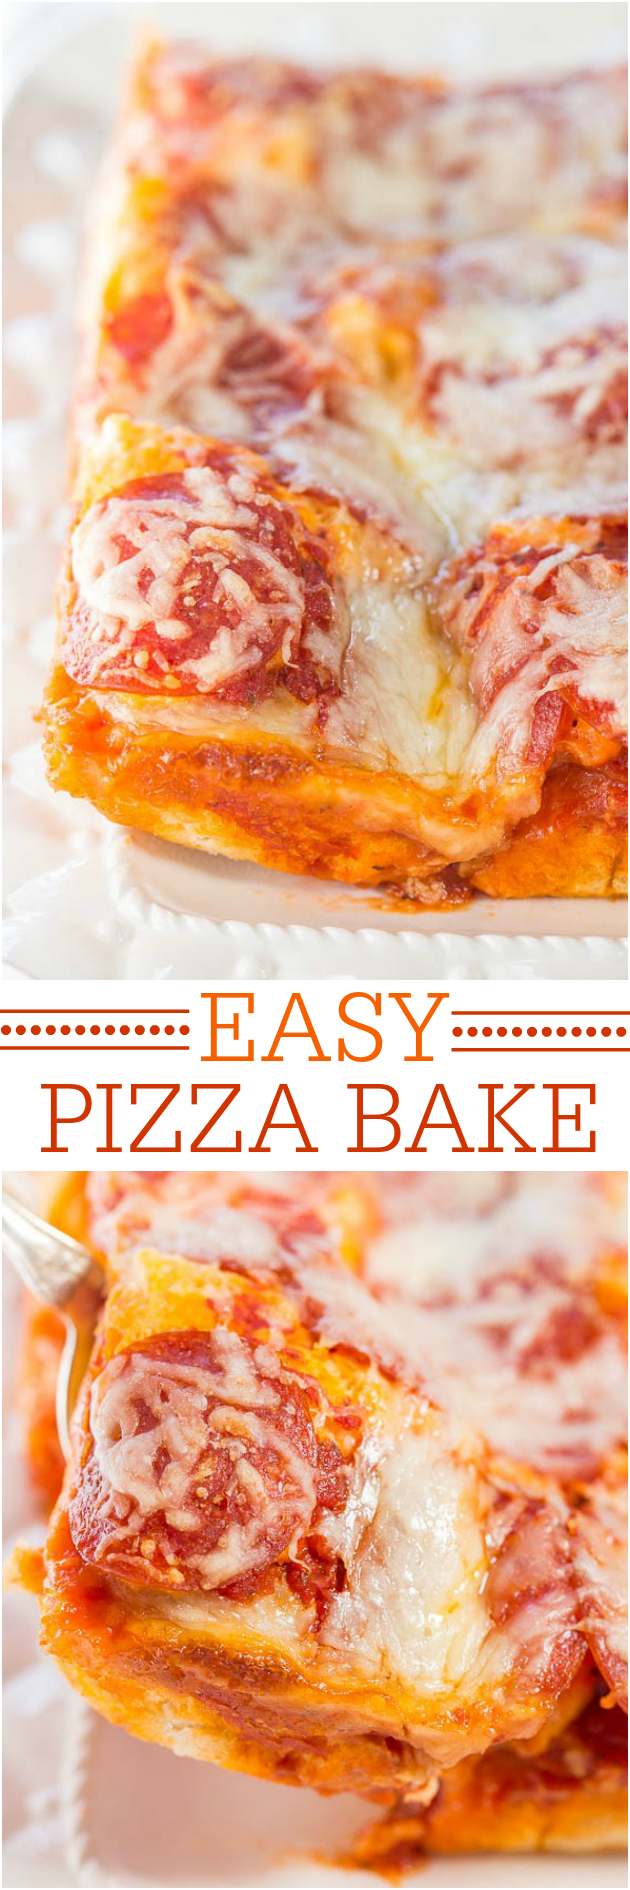 Easy Pizza Bake - Skip takeout and make your own warm and cheesy deep dish pizza bake! Fast, easy, and ready in 30 minutes! It's a keeper everyone loves!!